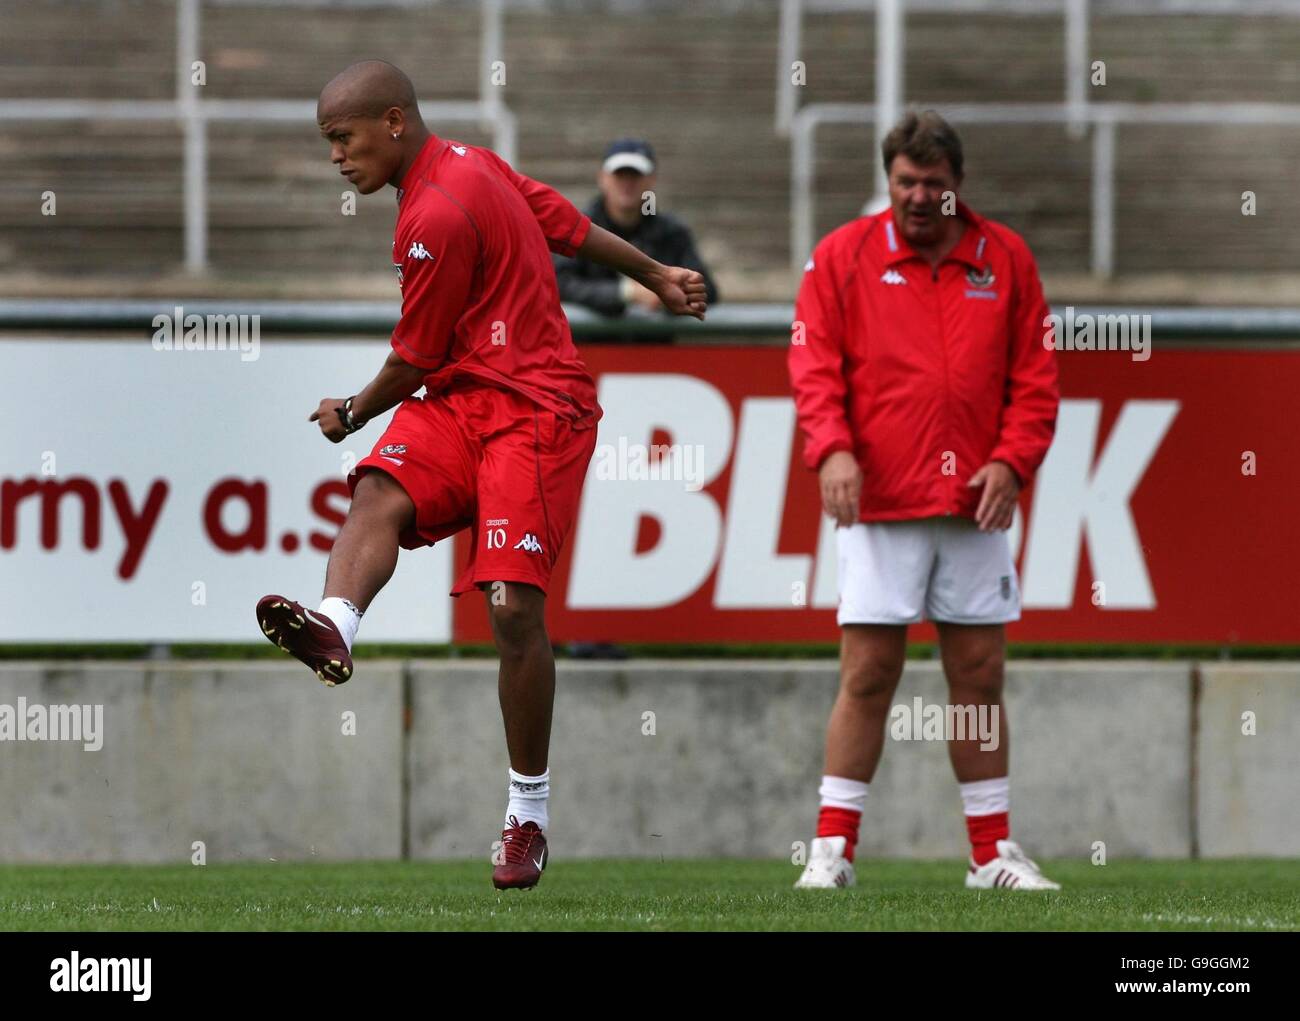 Soccer - Wales training session - Prague, Czech Republic. Wales' Robert Earnshaw is watched by manager John Toshack (right) during a training session at the Stahov Stadium, Prague Czech Republic. Stock Photo